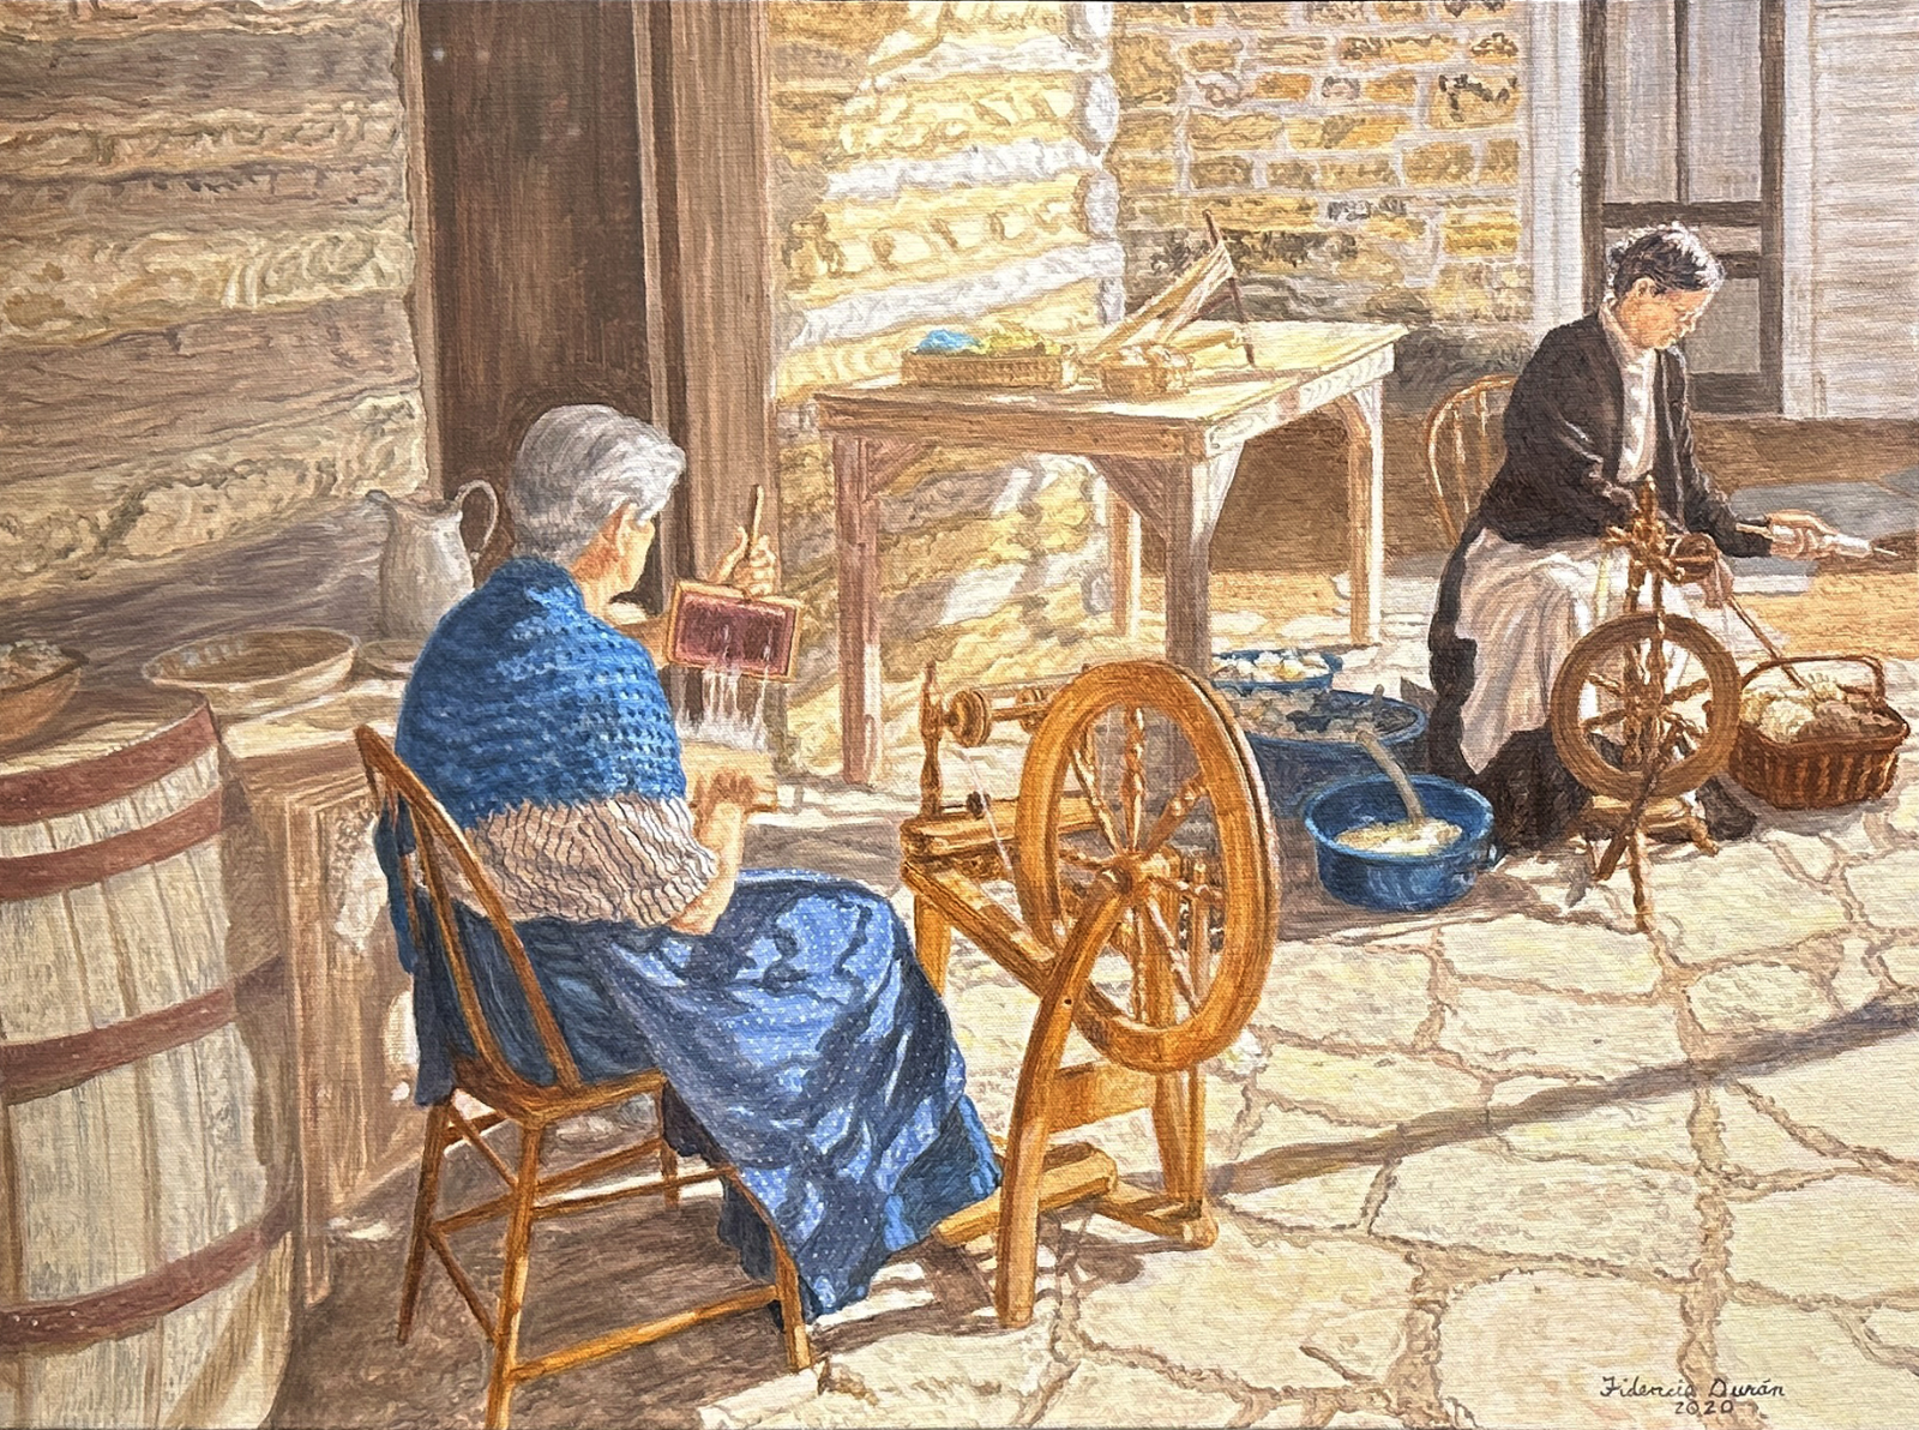 Carding Wool, Lyndon B. Johnson State Park and State Historic Site by Fidencio Duran